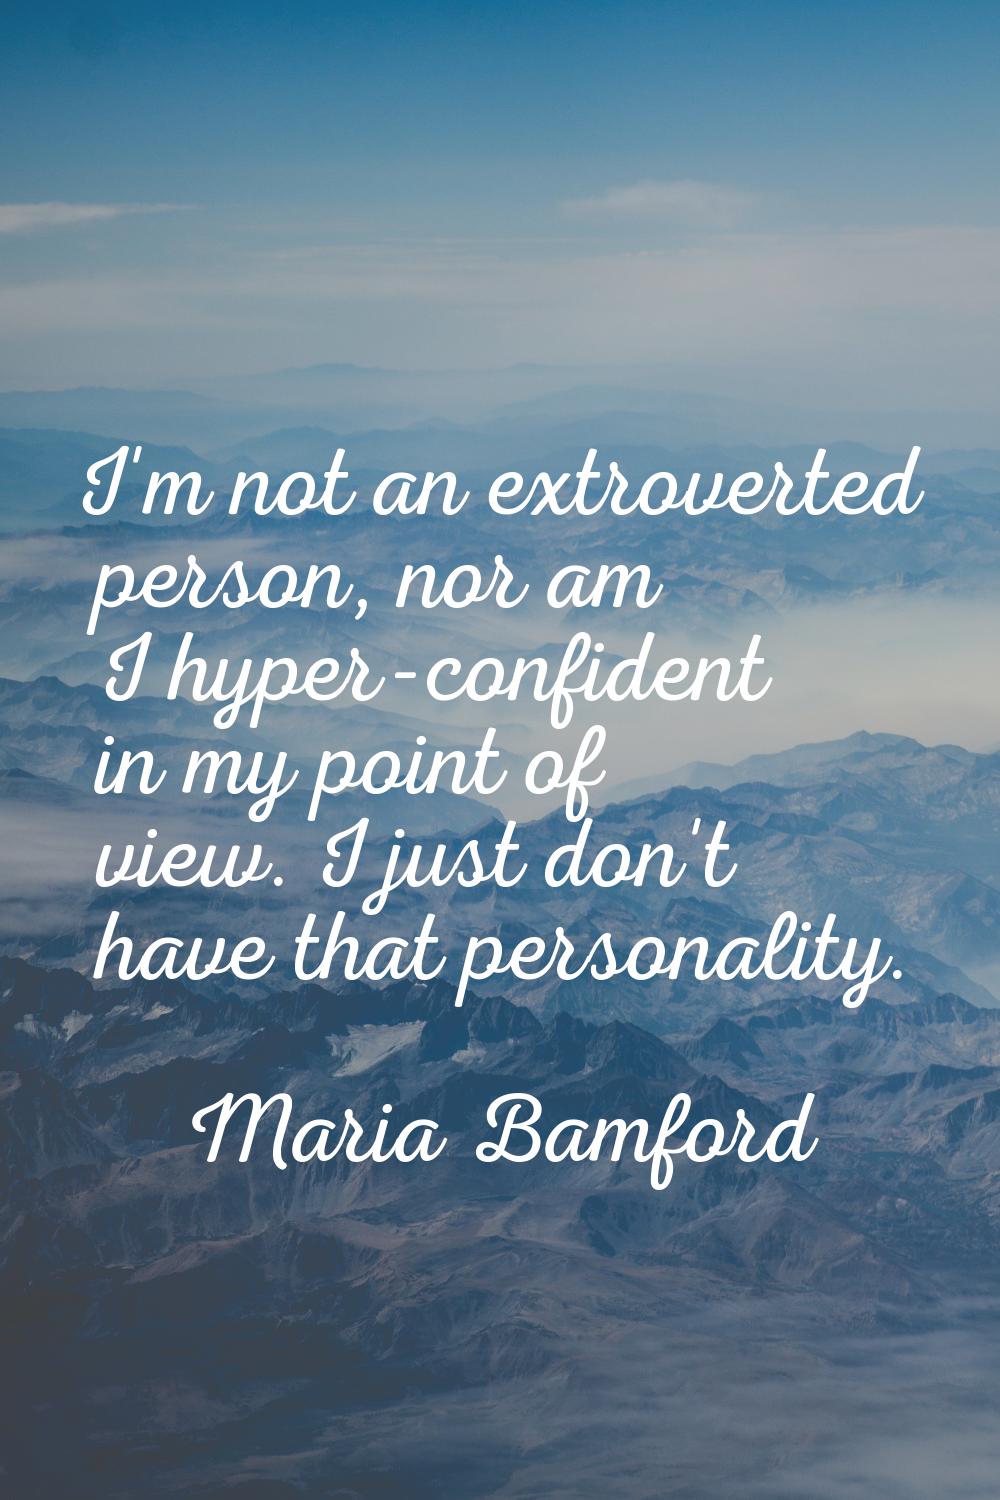 I'm not an extroverted person, nor am I hyper-confident in my point of view. I just don't have that